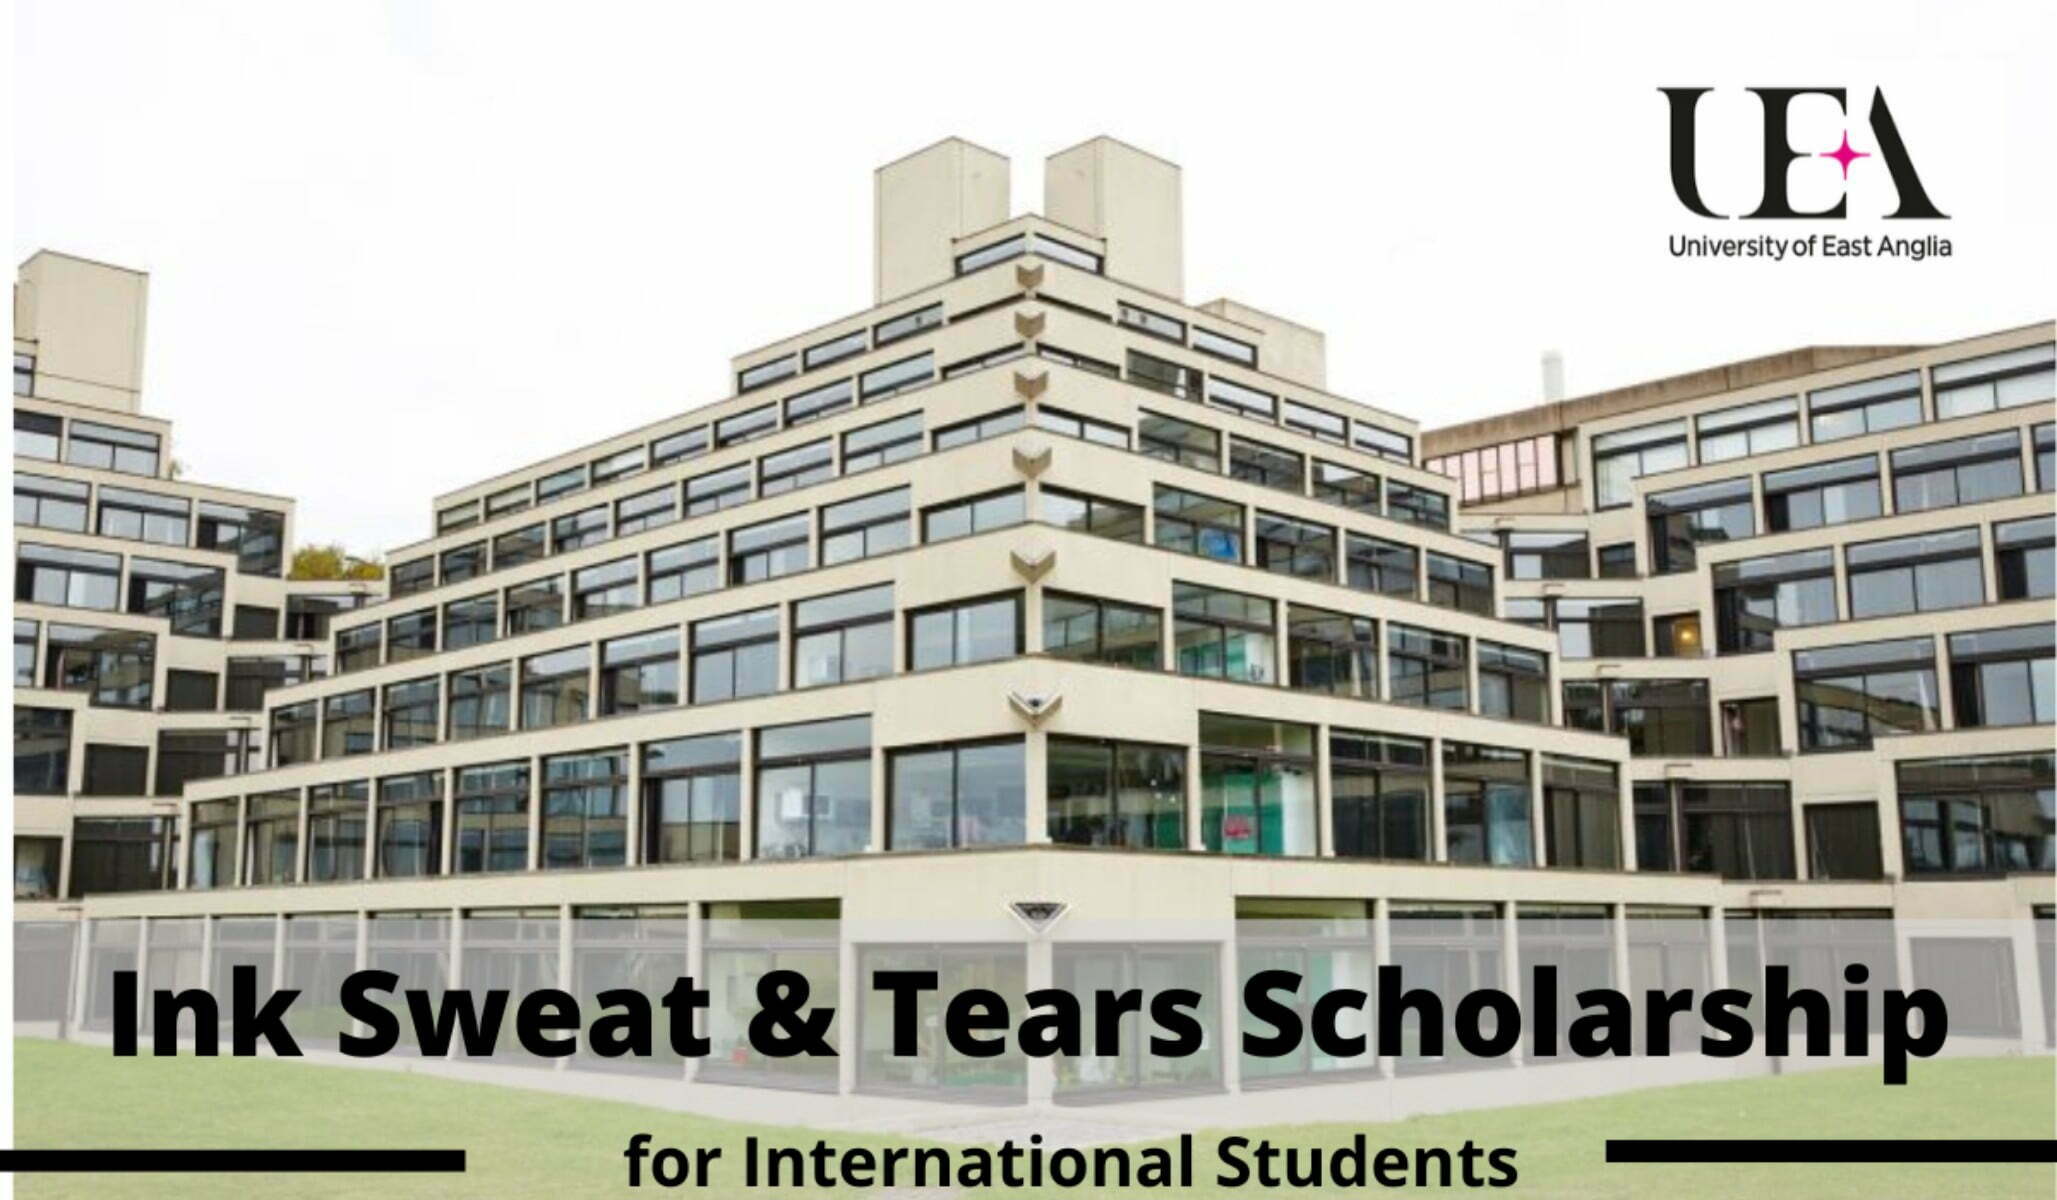 Ink Sweat & Tears International Scholarships 2023 at University of East Anglia in UK